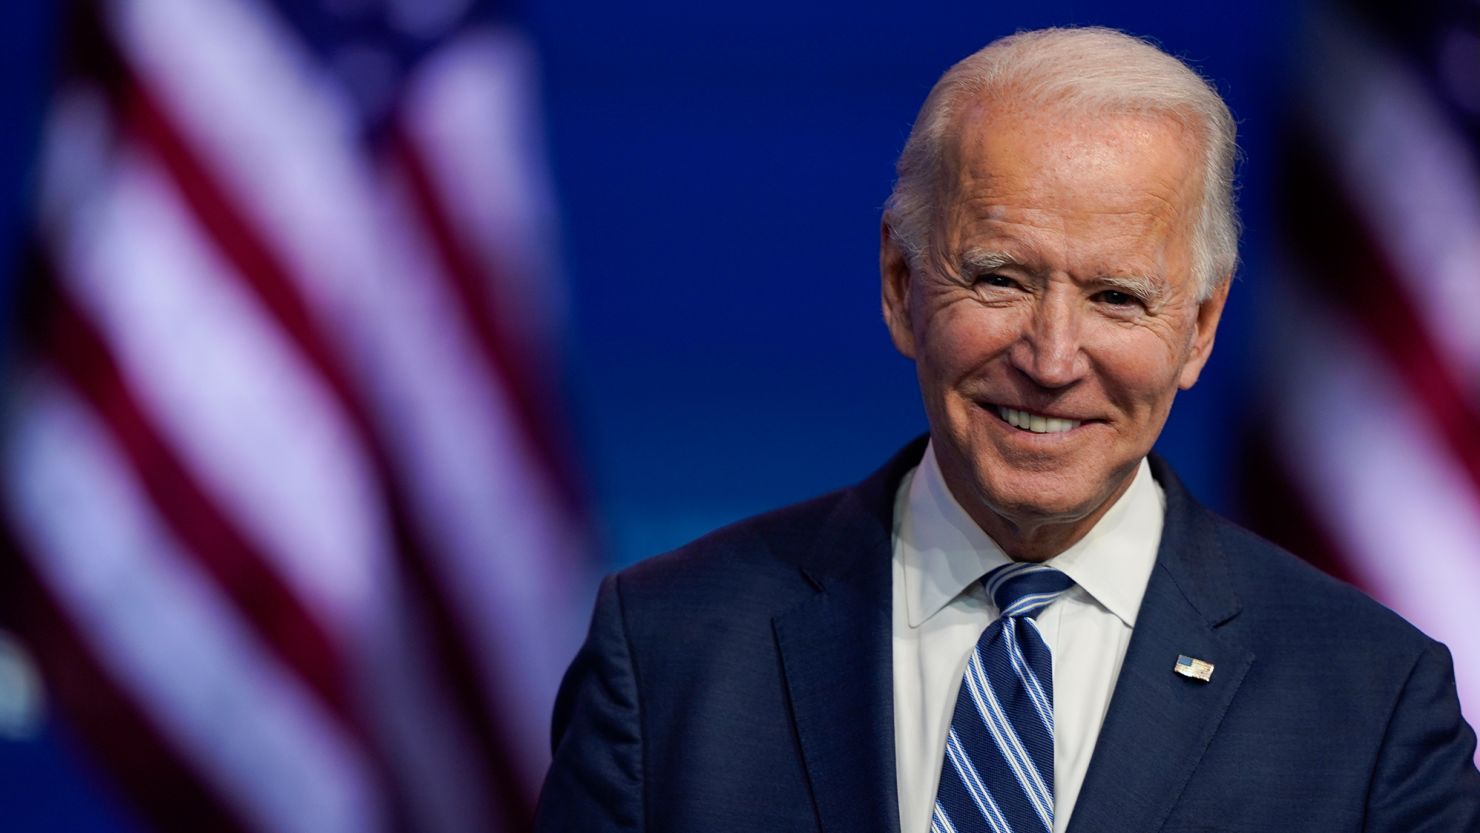 Biden’s toughest foreign policy challenge may be regaining allies ...